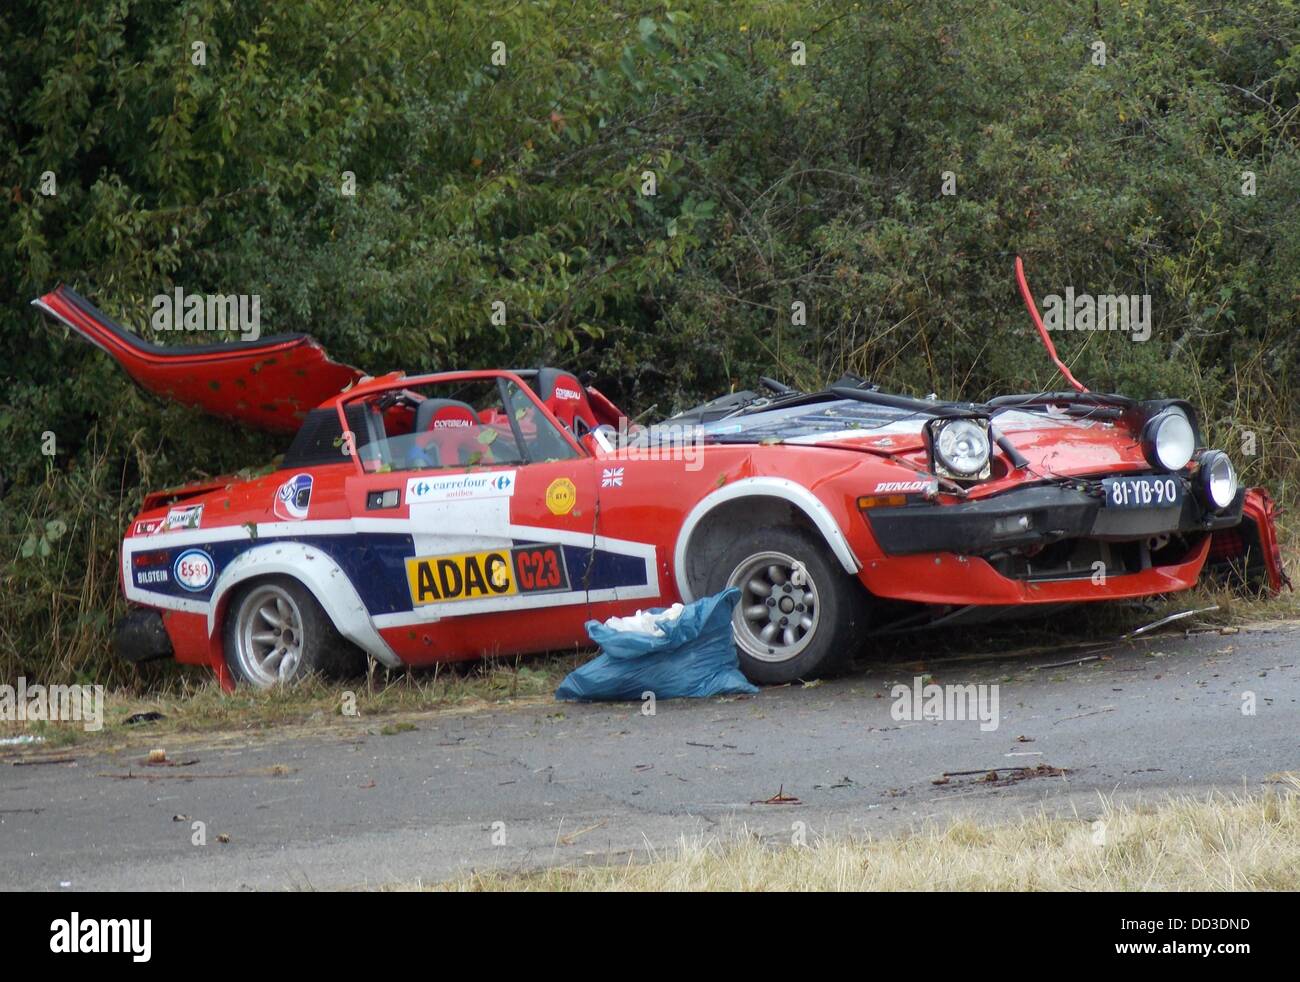 Classic Rally Car High Resolution Stock Photography and Images - Alamy